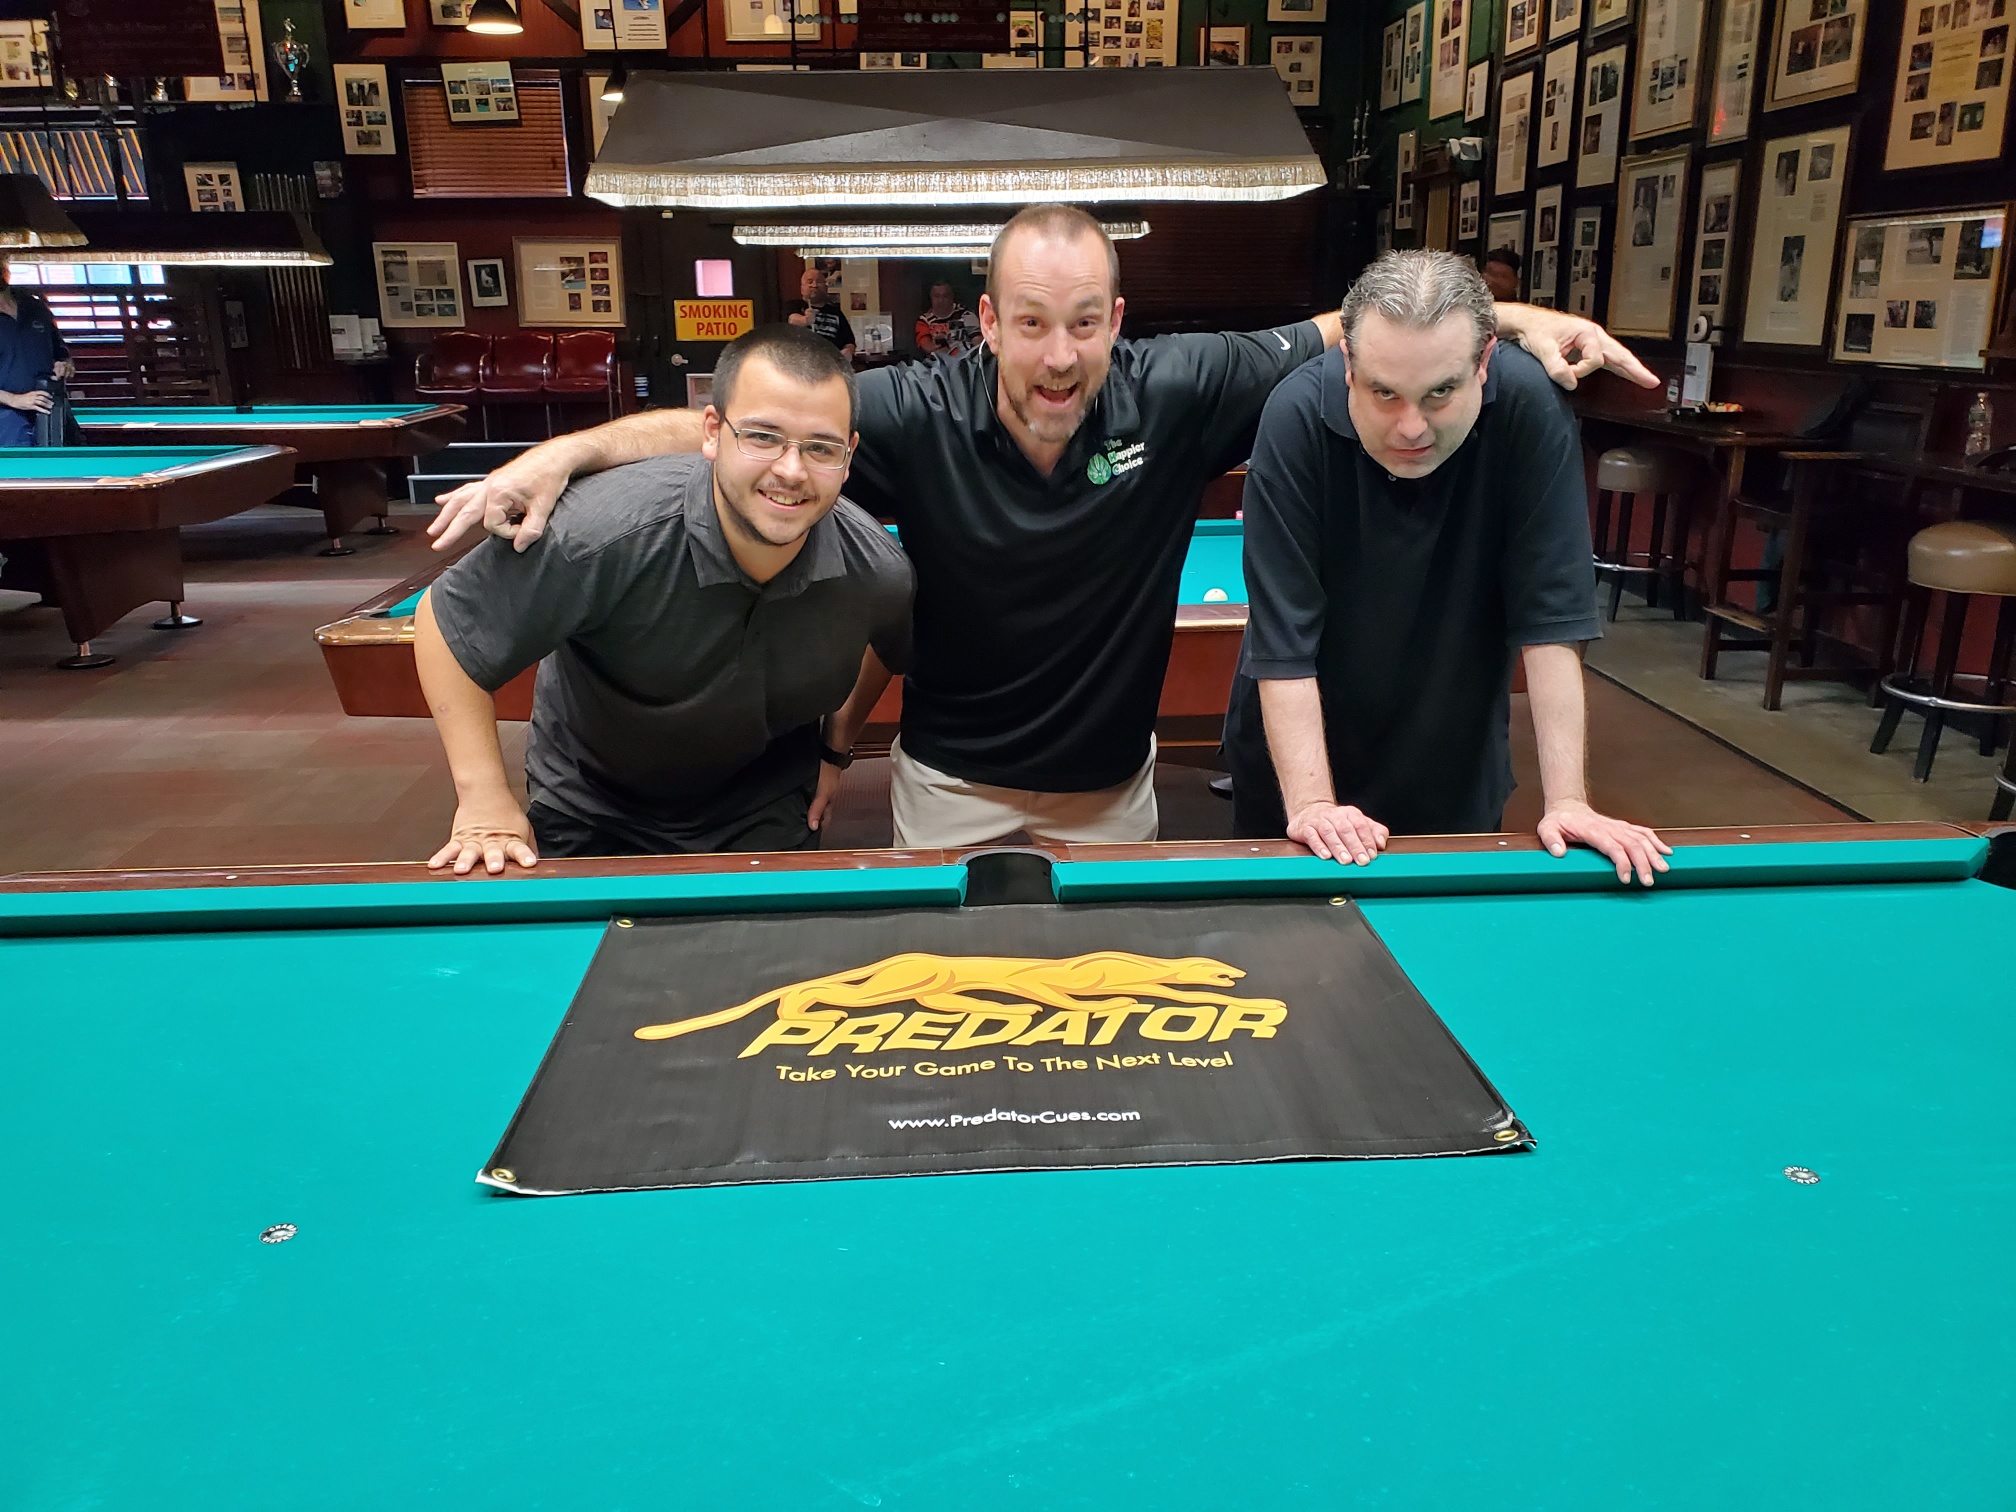 2021 SNOOKERS SUMMER SIZZLER Snookers - Craft Beer, Billiards and American Sports Bar